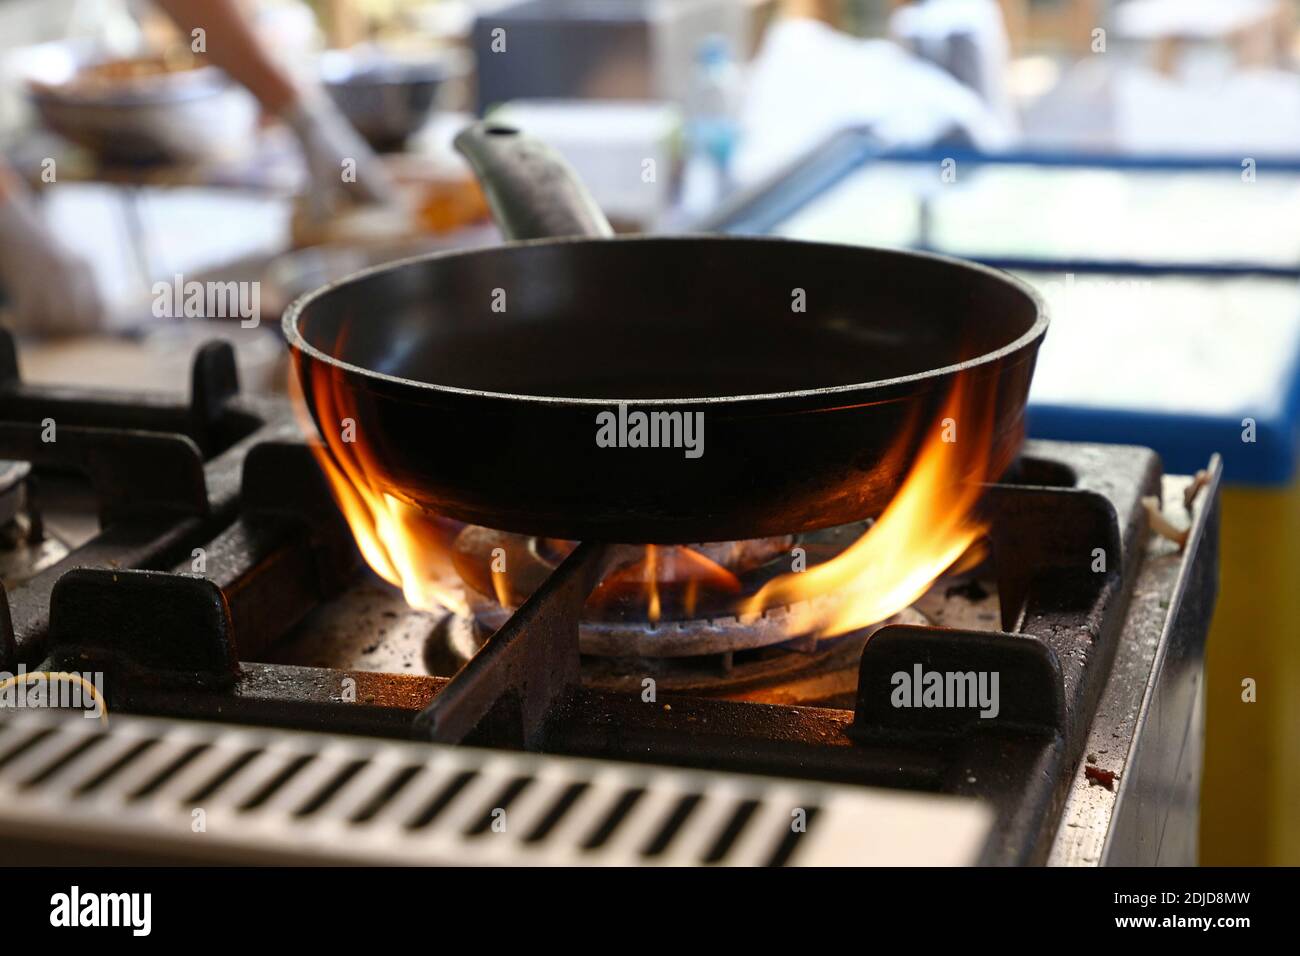 Close-up Of Cooking Pan On Burning Stove At Restaurant Stock Photo